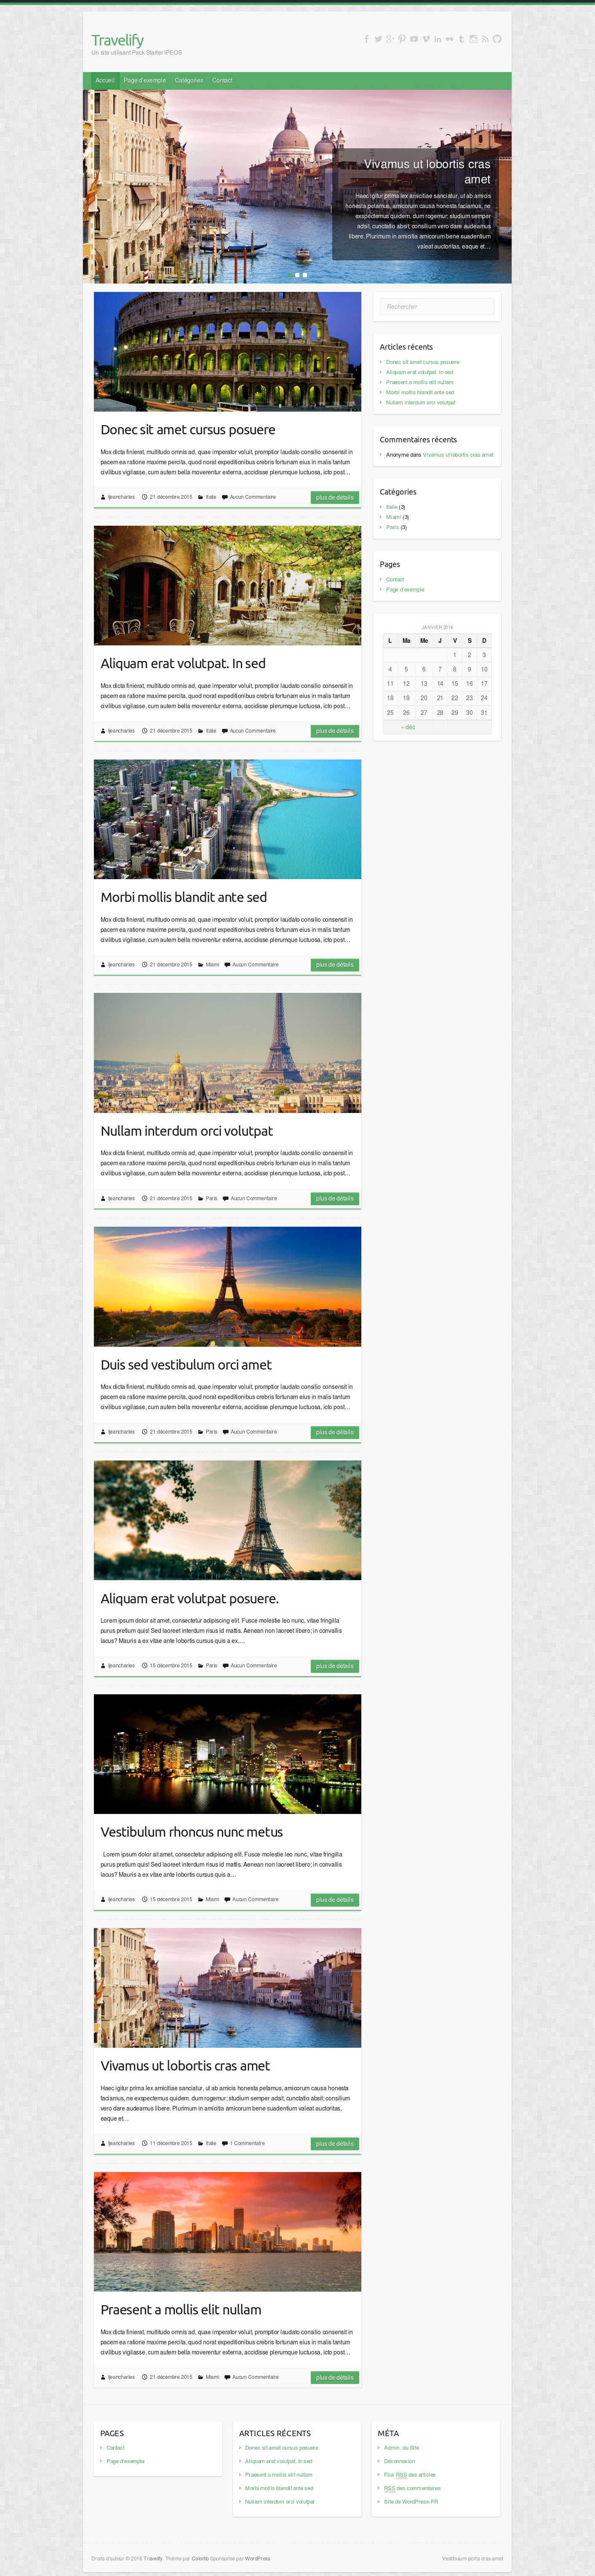 Travelify-Un-site-utilisant-Pack-Starter-IPEOS